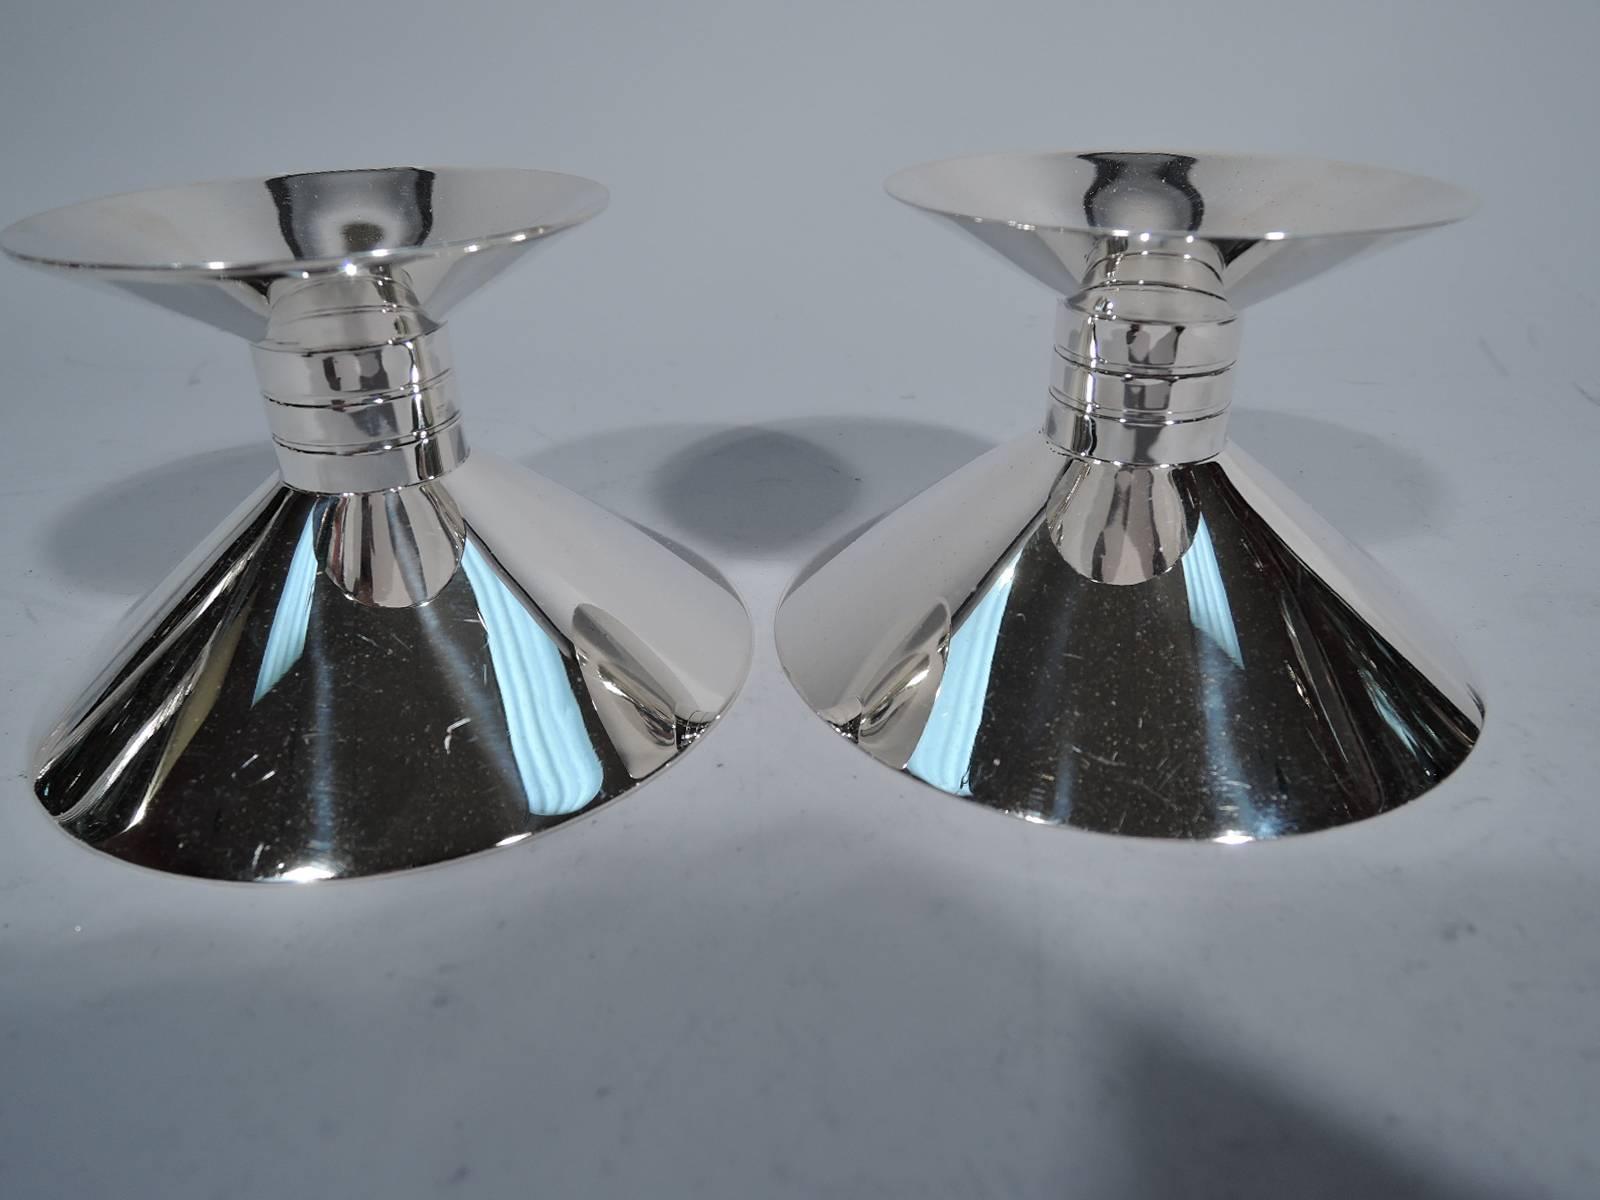 Pair of modern sterling silver candlesticks. Made by Tiffany & Co. in New York. Small and shallow cone inverted on short cylinder with incised banding in turn mounted to large and shallow cone. Harmonious geometry. Hallmark includes pattern no.